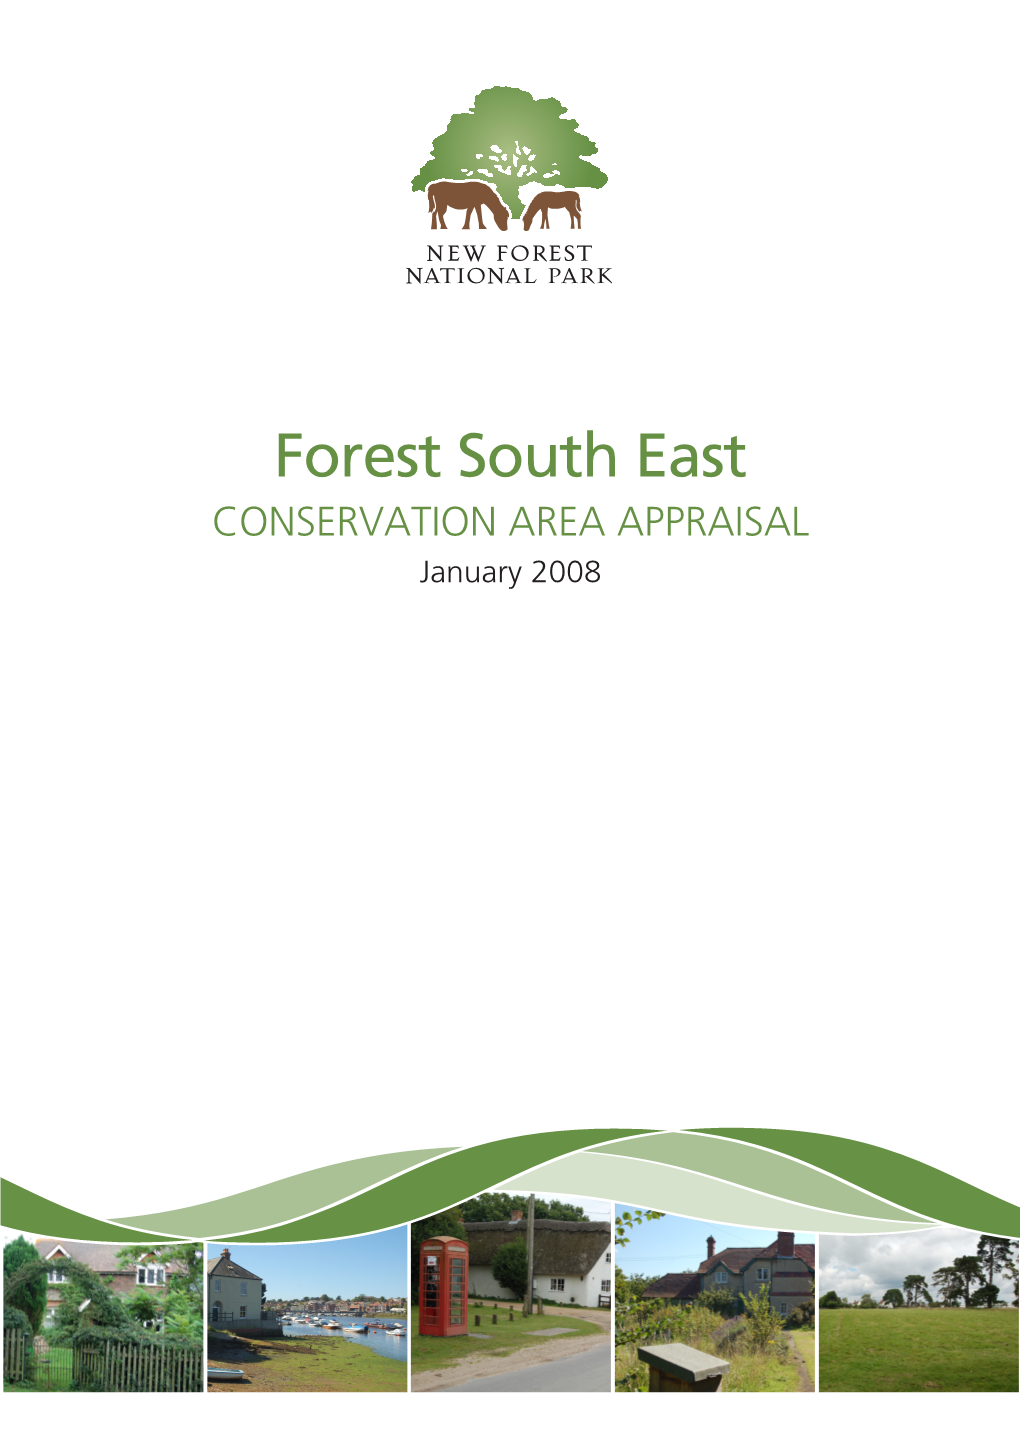 Forest South East CONSERVATION AREA APPRAISAL January 2008 This Is a Draft Text, It Does Not Yet Contain the Final Maps and Photographs